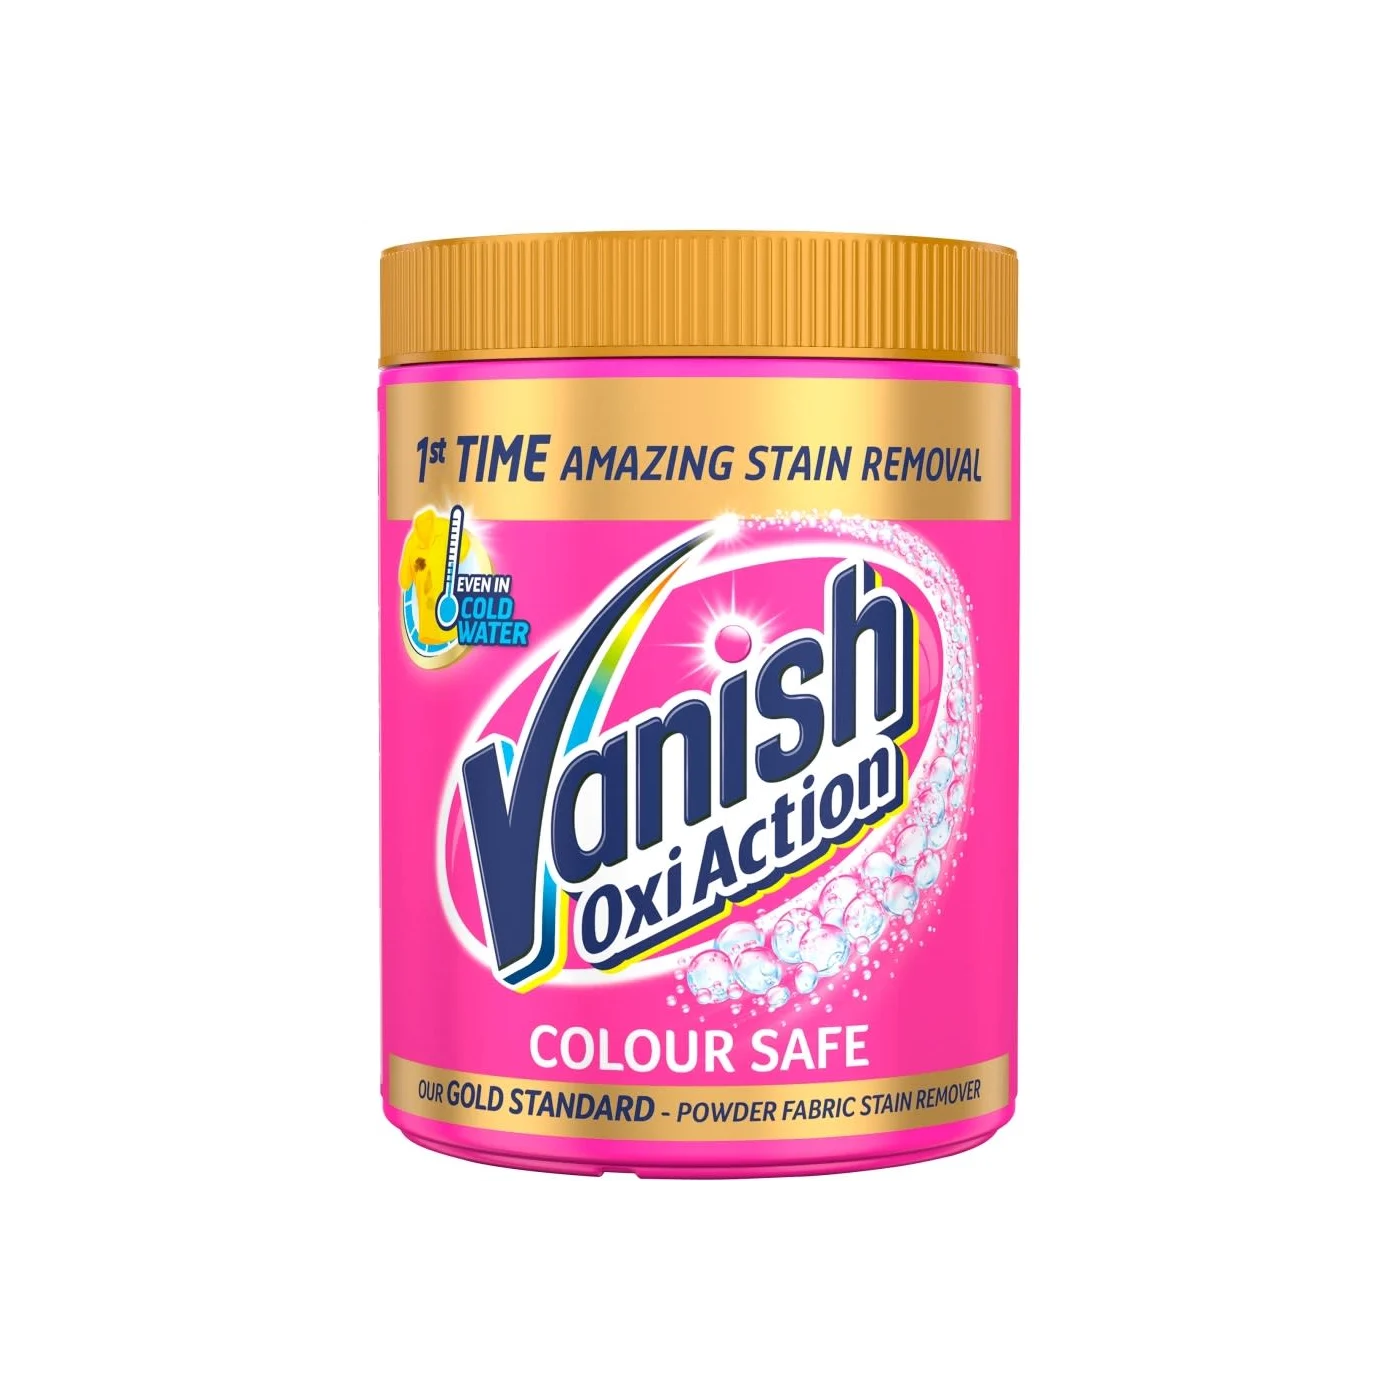 Vanish Gold Oxi-Action Colour Safe Stain Remover 1kg